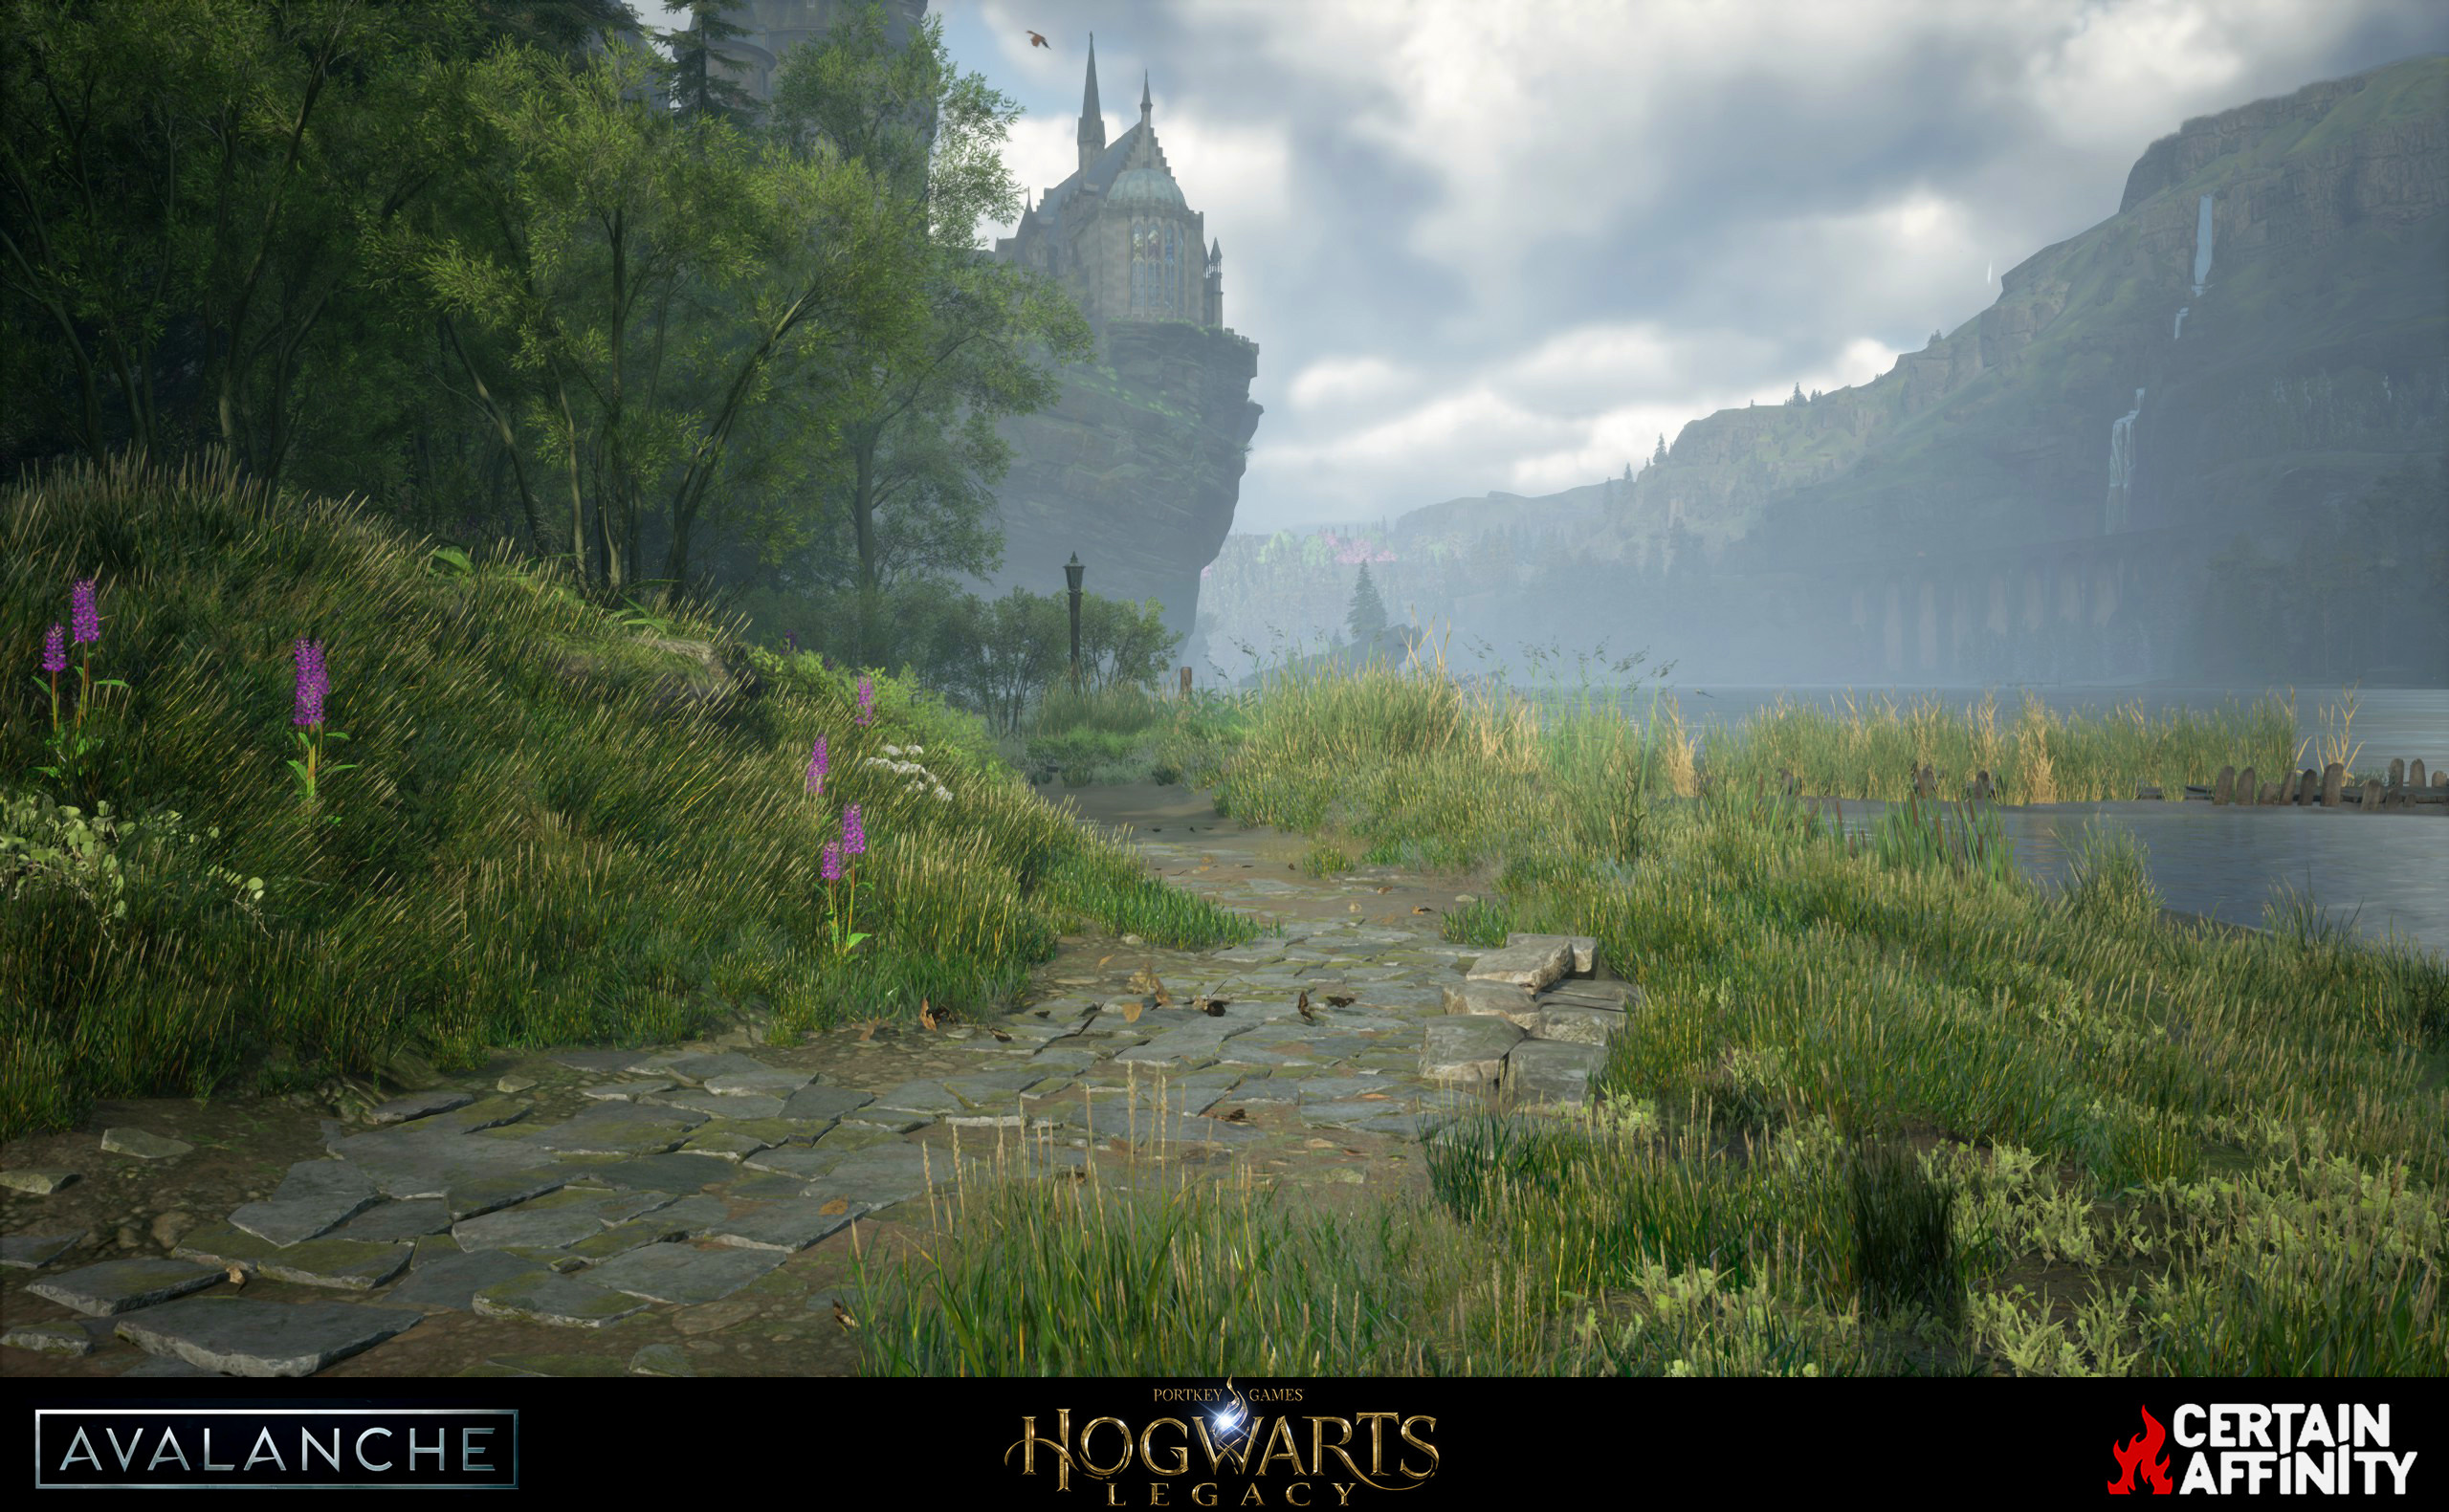 Turn around to see Hogwarts castle. I did all the set dressing, terrain painting, and foliage placement in this area.